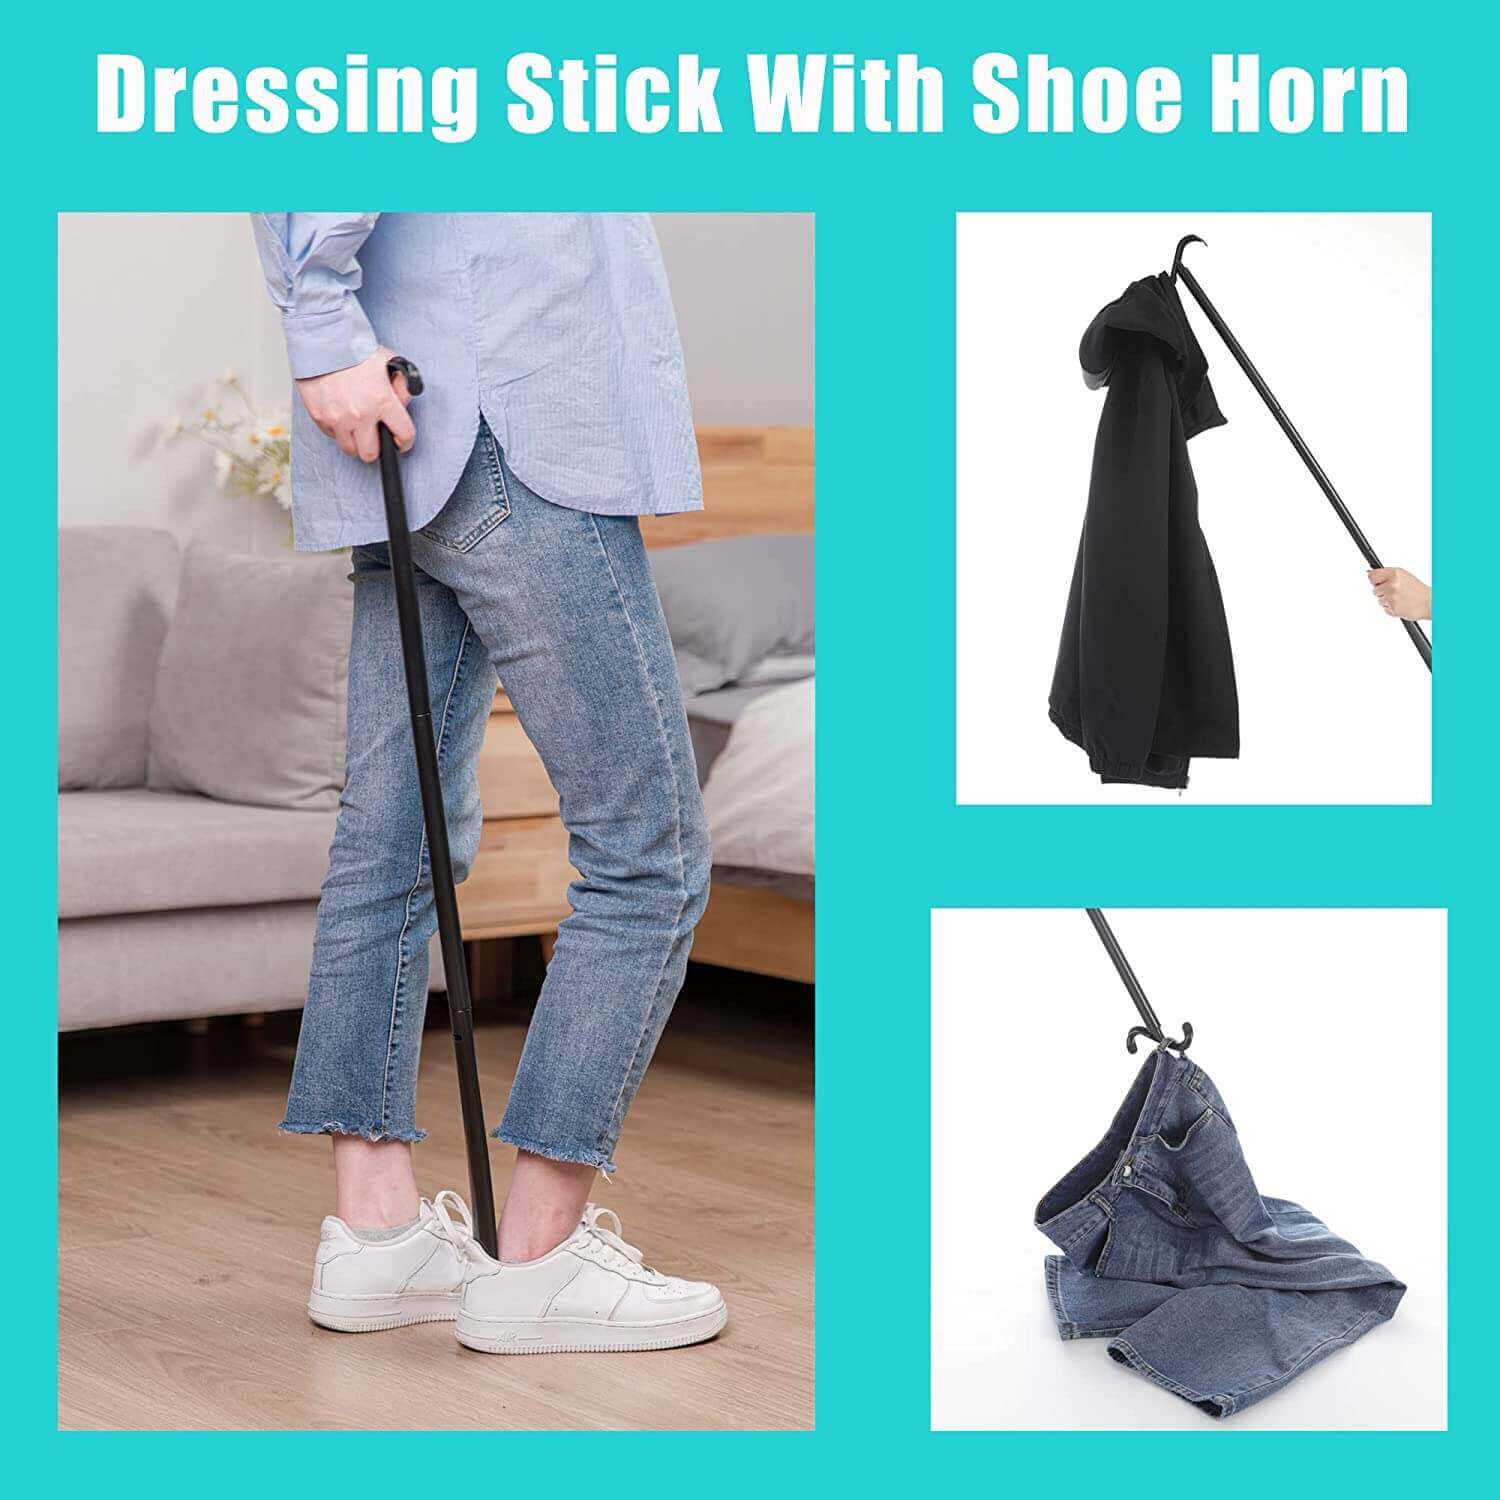 Fanwer Long-Handle Shoe Horn Dressing Stick Sock Remover for Seniors, two functions as shoe horn and dressing stick